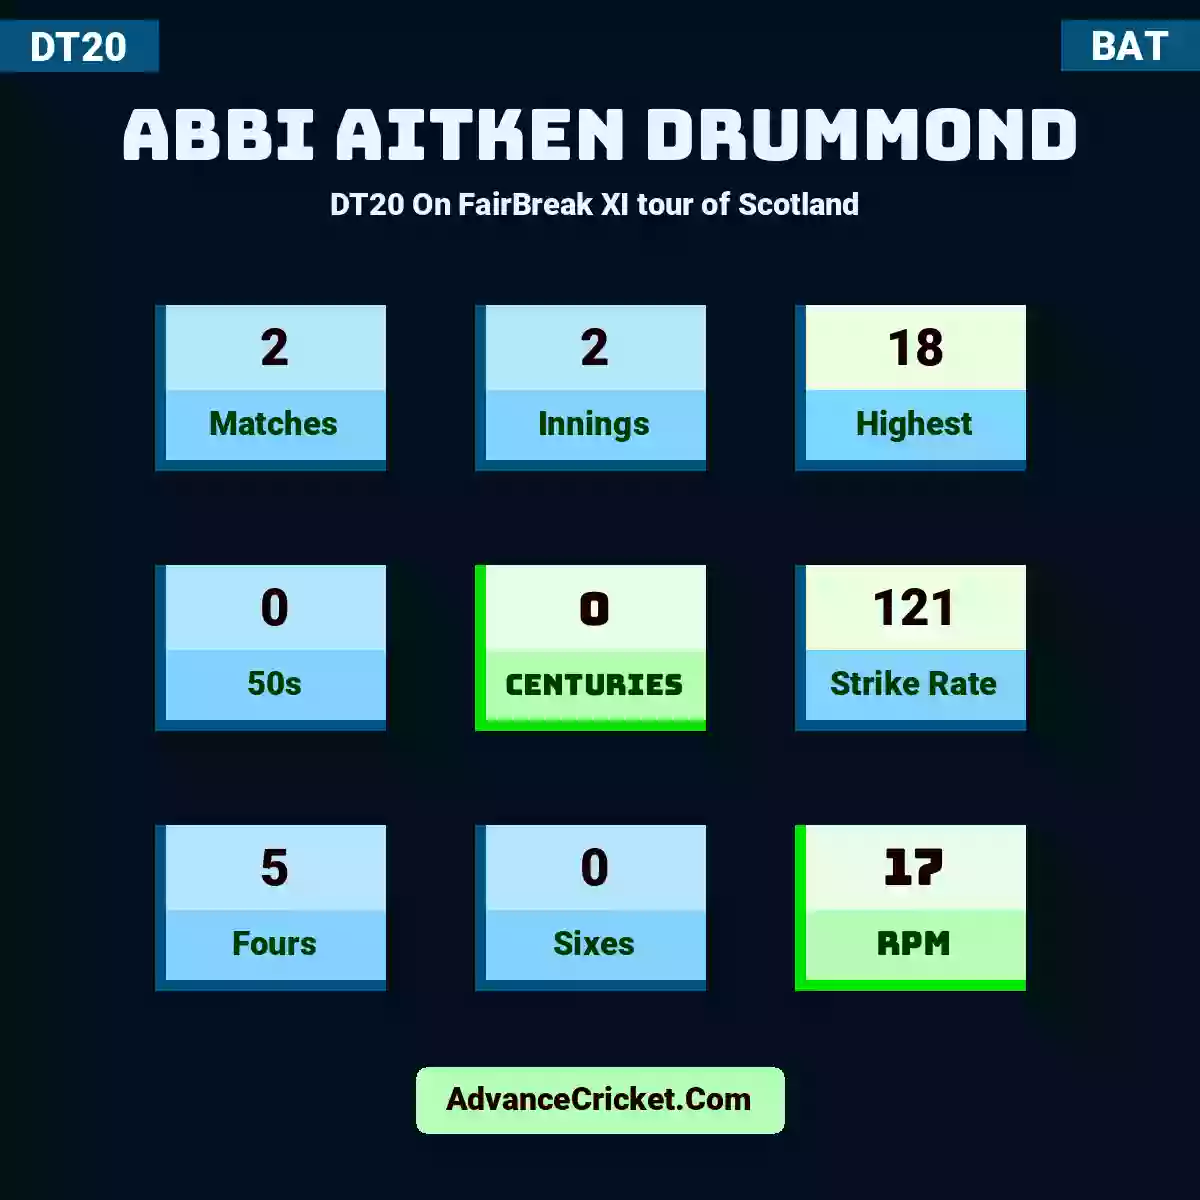 Abbi Aitken Drummond DT20  On FairBreak XI tour of Scotland , Abbi Aitken Drummond played 2 matches, scored 18 runs as highest, 0 half-centuries, and 0 centuries, with a strike rate of 121. A.Drummond hit 5 fours and 0 sixes, with an RPM of 17.